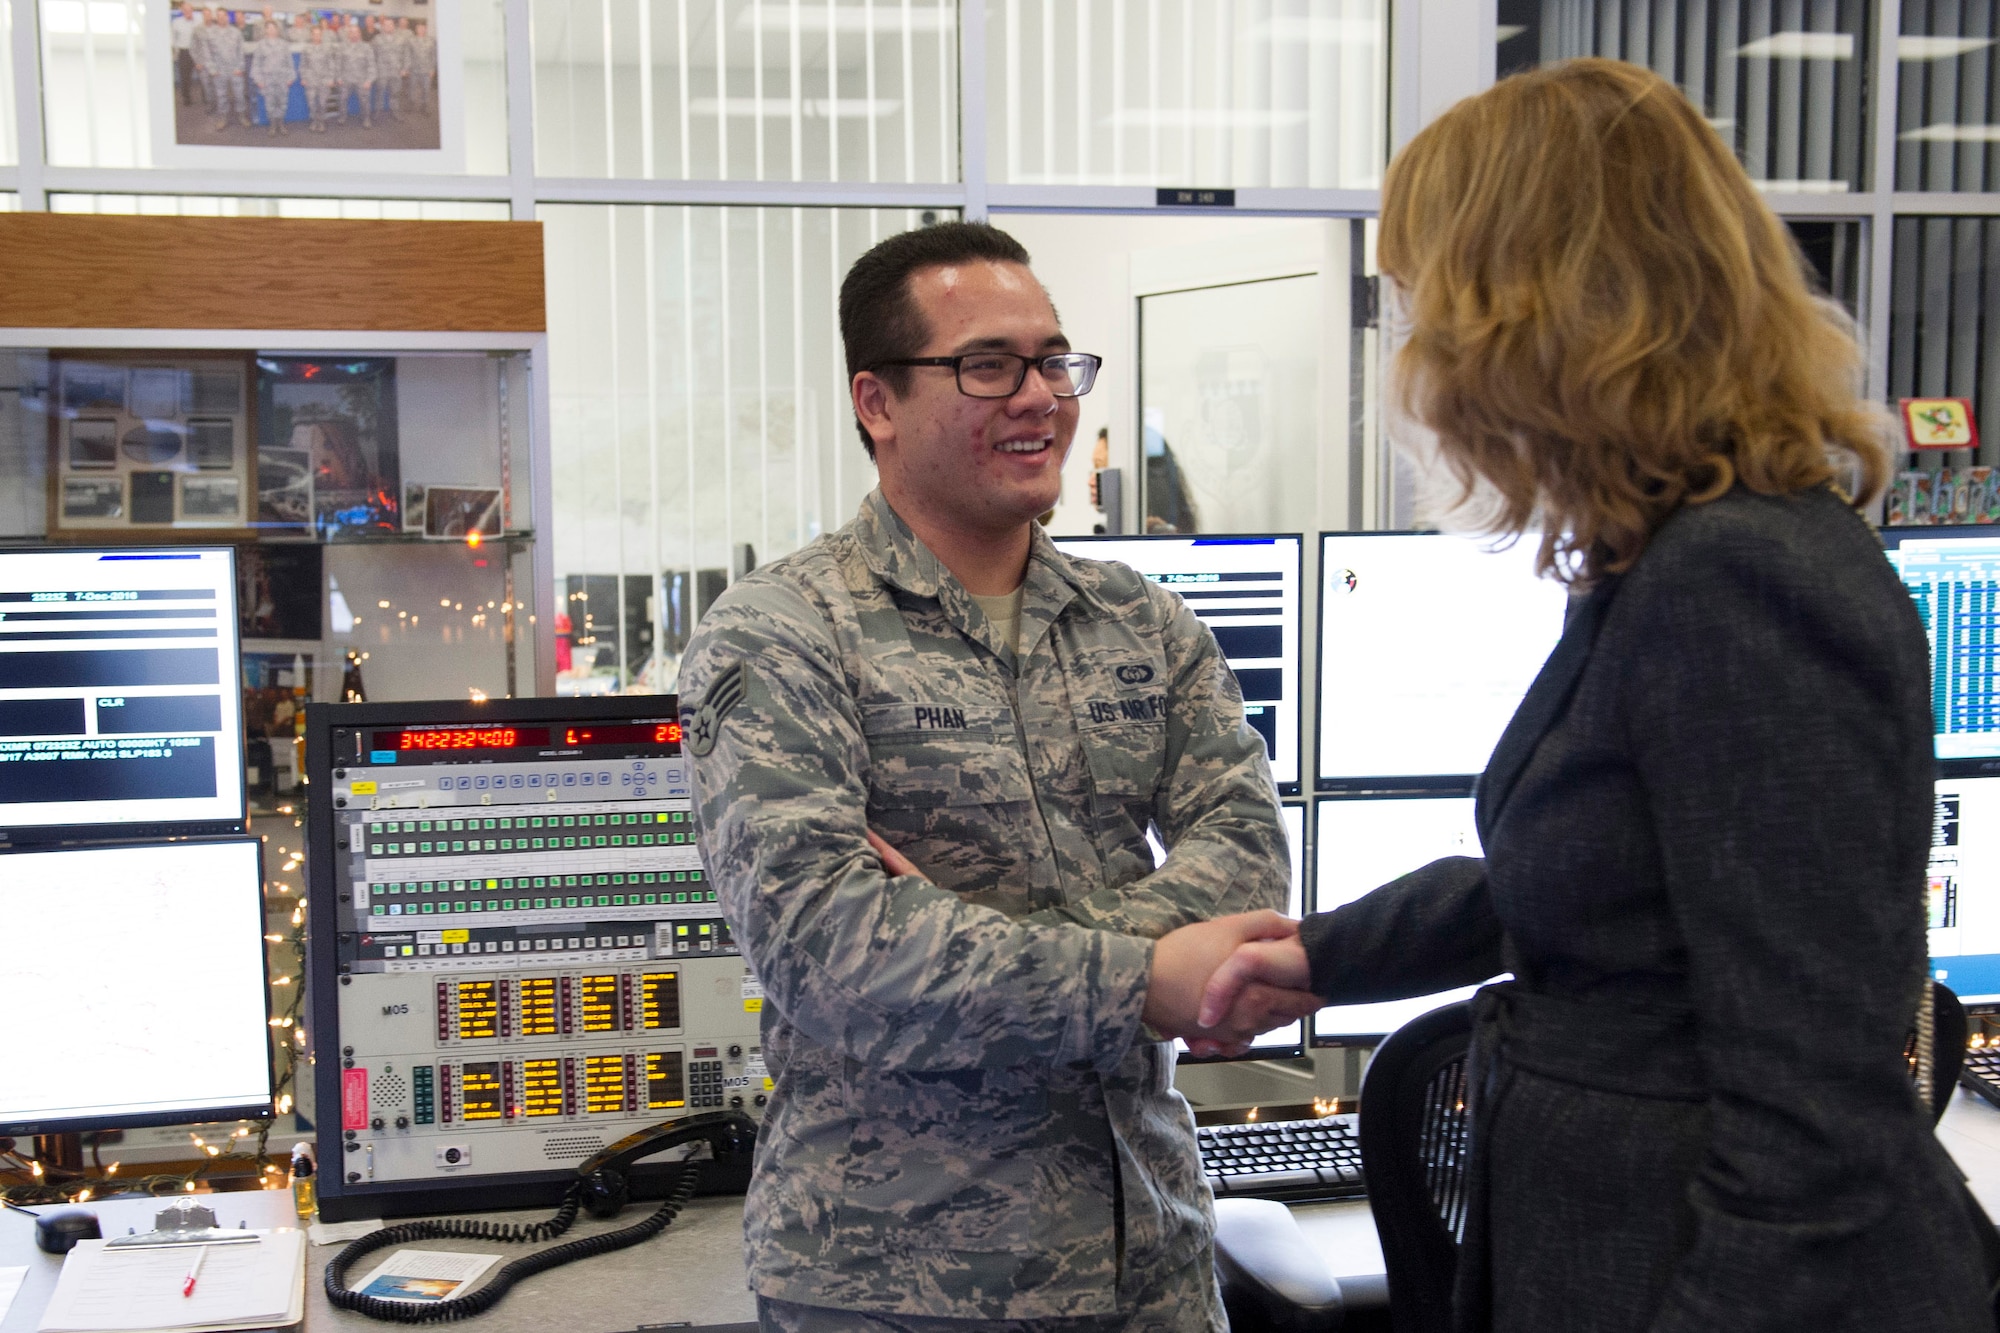 Under Secretary of the Air Force Lisa S. Disbrow coins Senior Airman Phi Phan for his dedication to the weather mission Dec. 7, 2016, at Cape Canaveral Air Force Station, Fla. The 45th Weather Squadron provides operational support to the range to ensure safe access to air and space.
